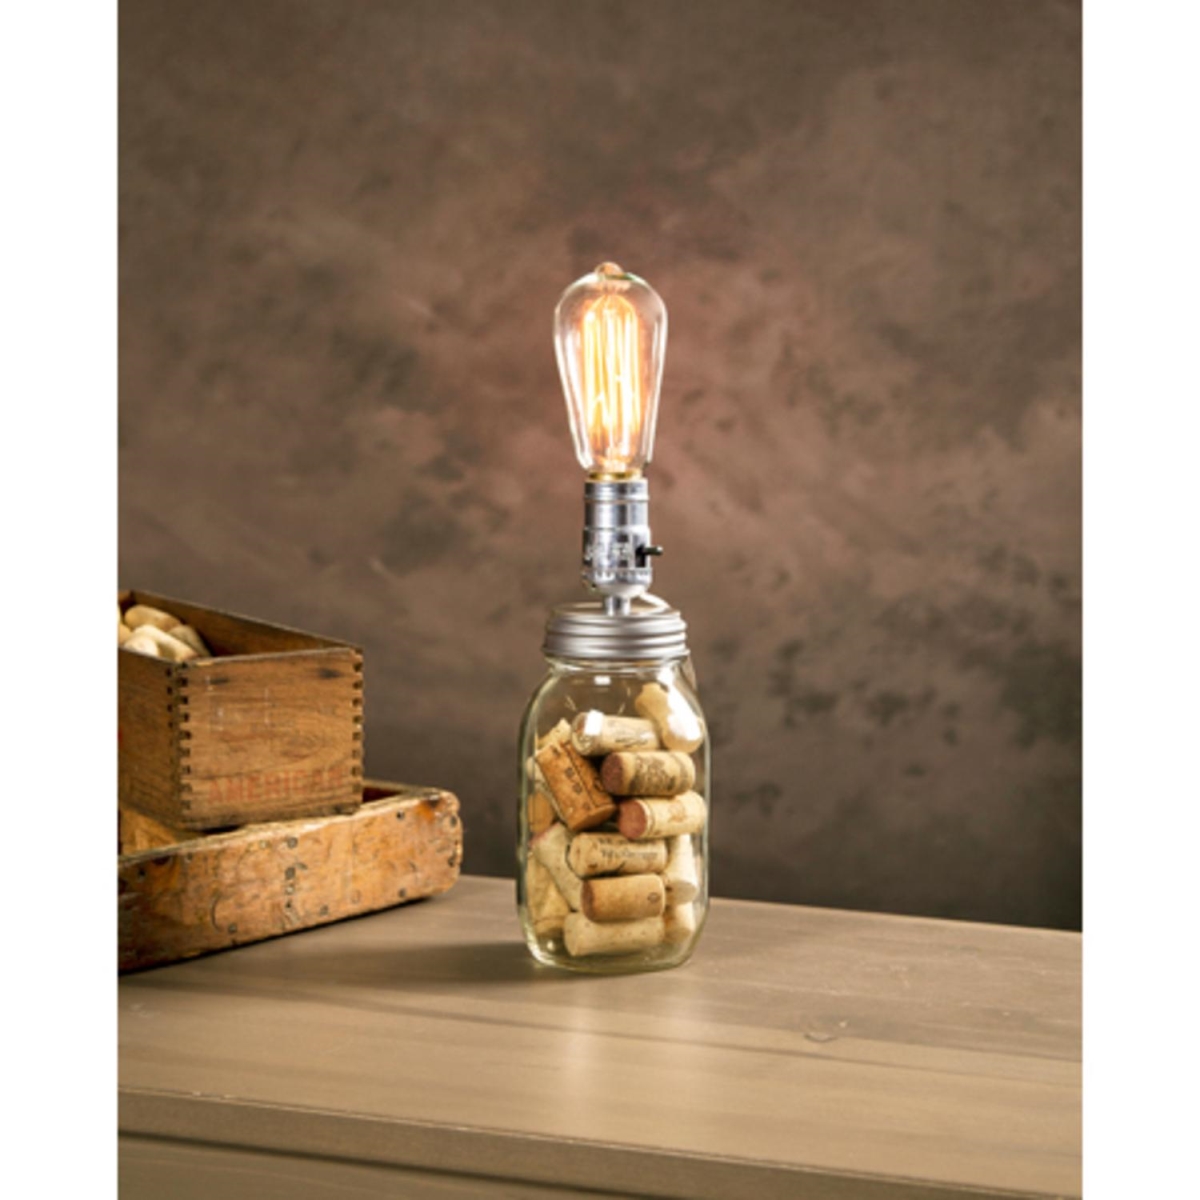 Picture of Darice 32038157 7.5 ft. Cleveland Vintage Lighting Silver Canning Jar Light Bulb Lamp Adapter